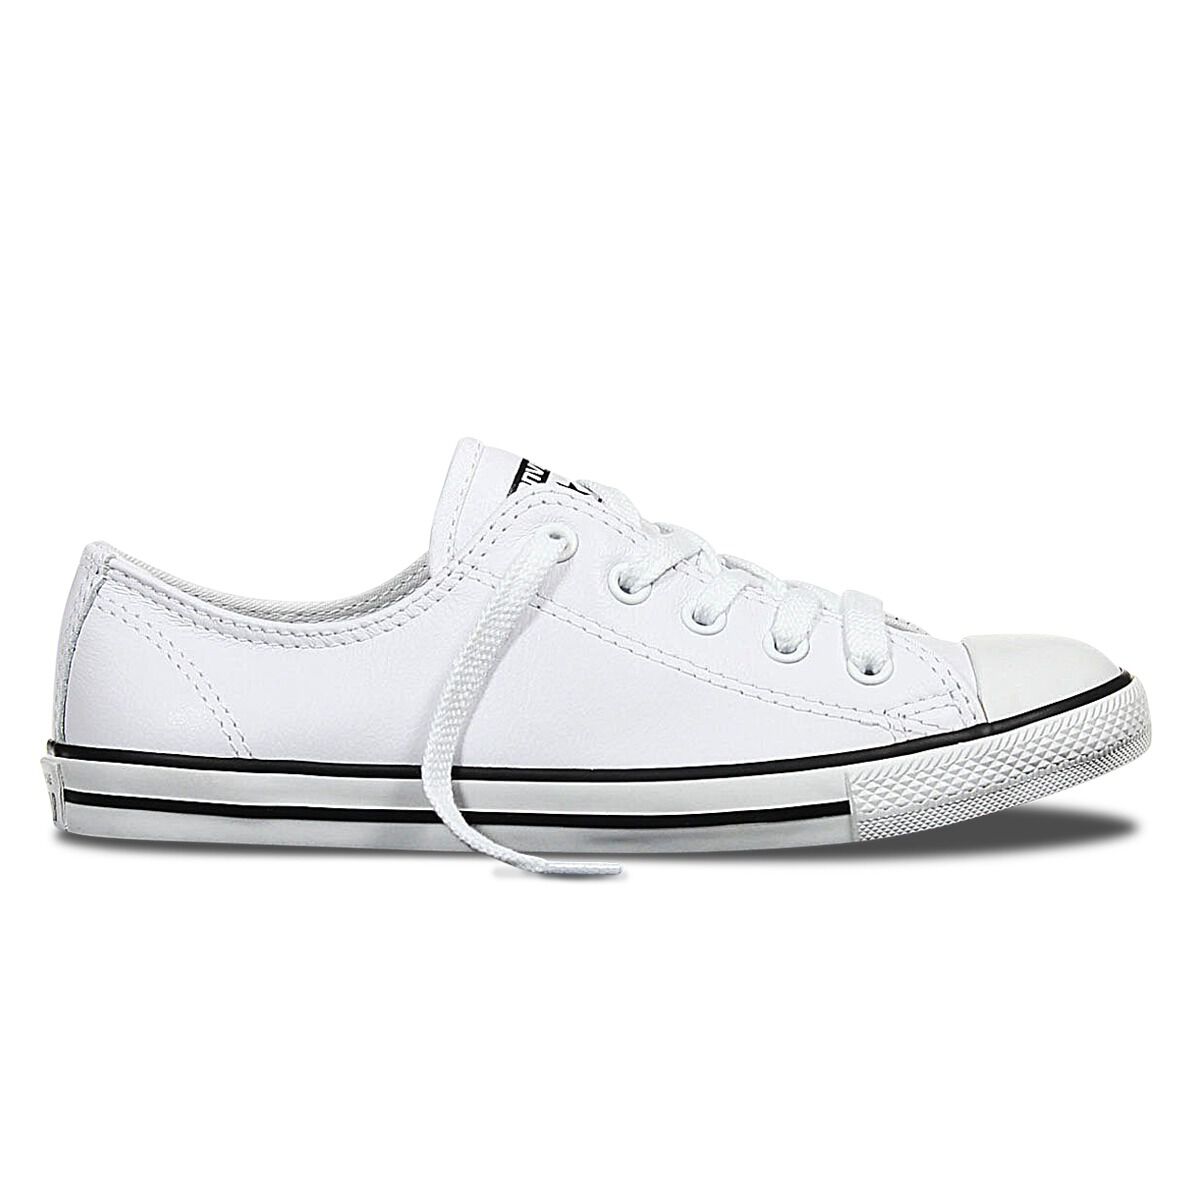 leather converse shoes white